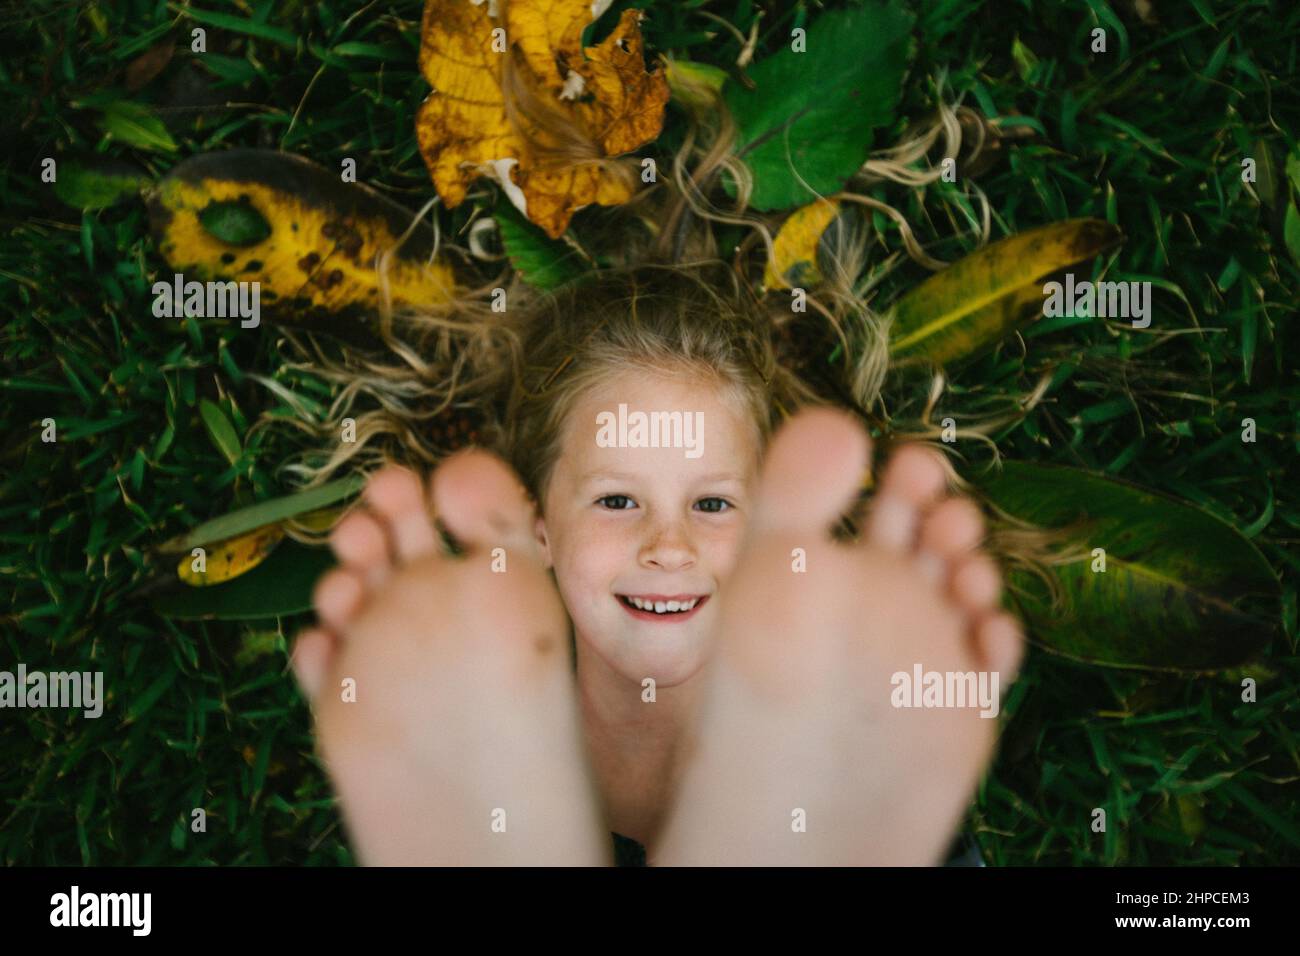 Playful girl smiling face framed by feet with grass and leaves Stock Photo